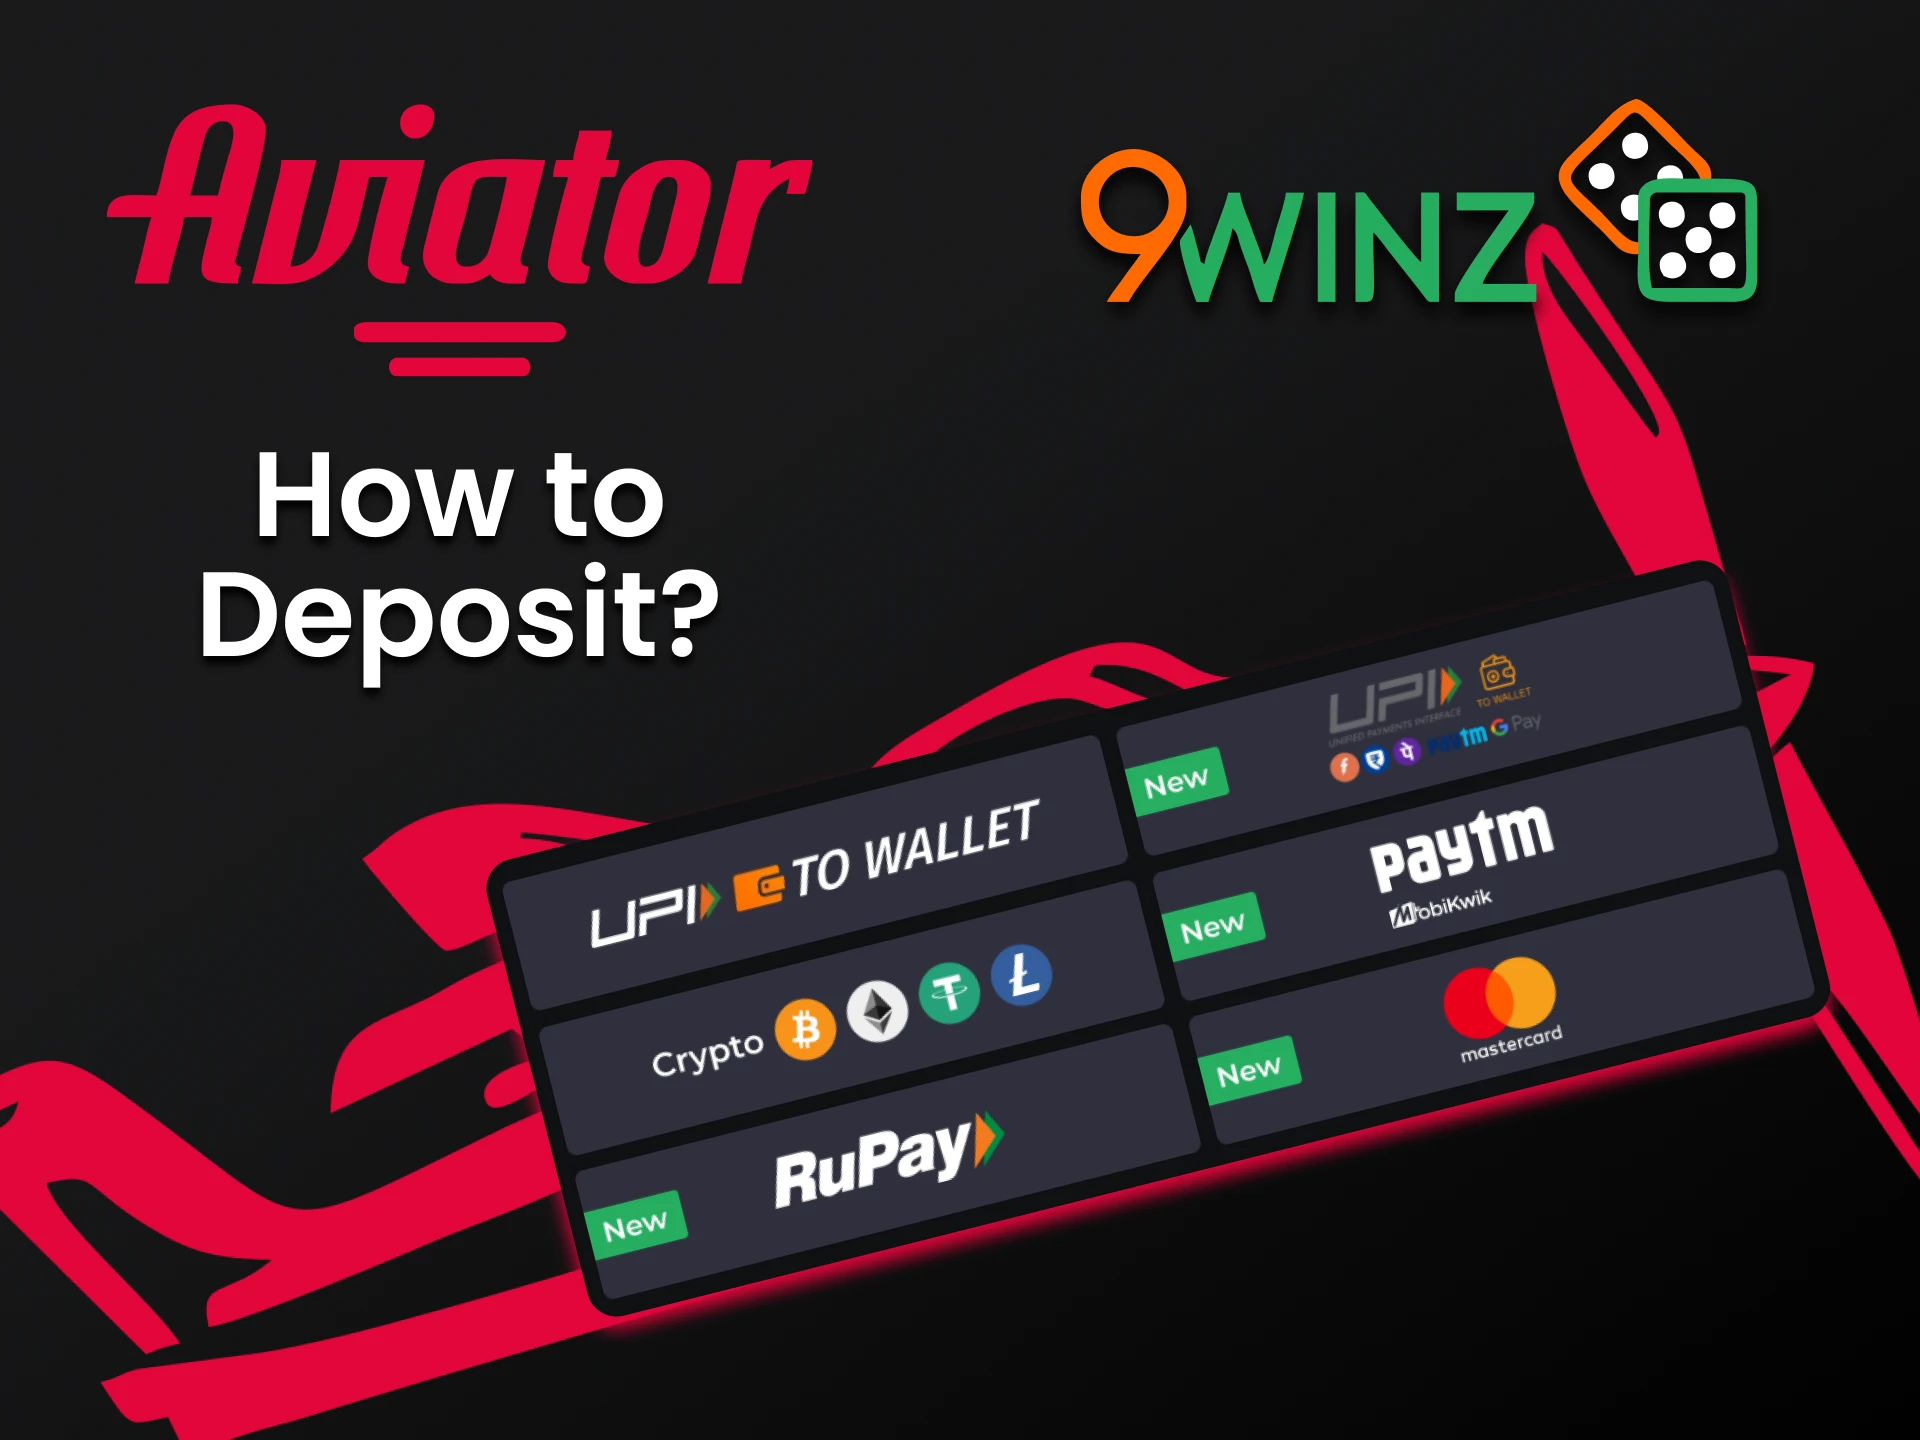 Replenish funds with a convenient method from 9winz.